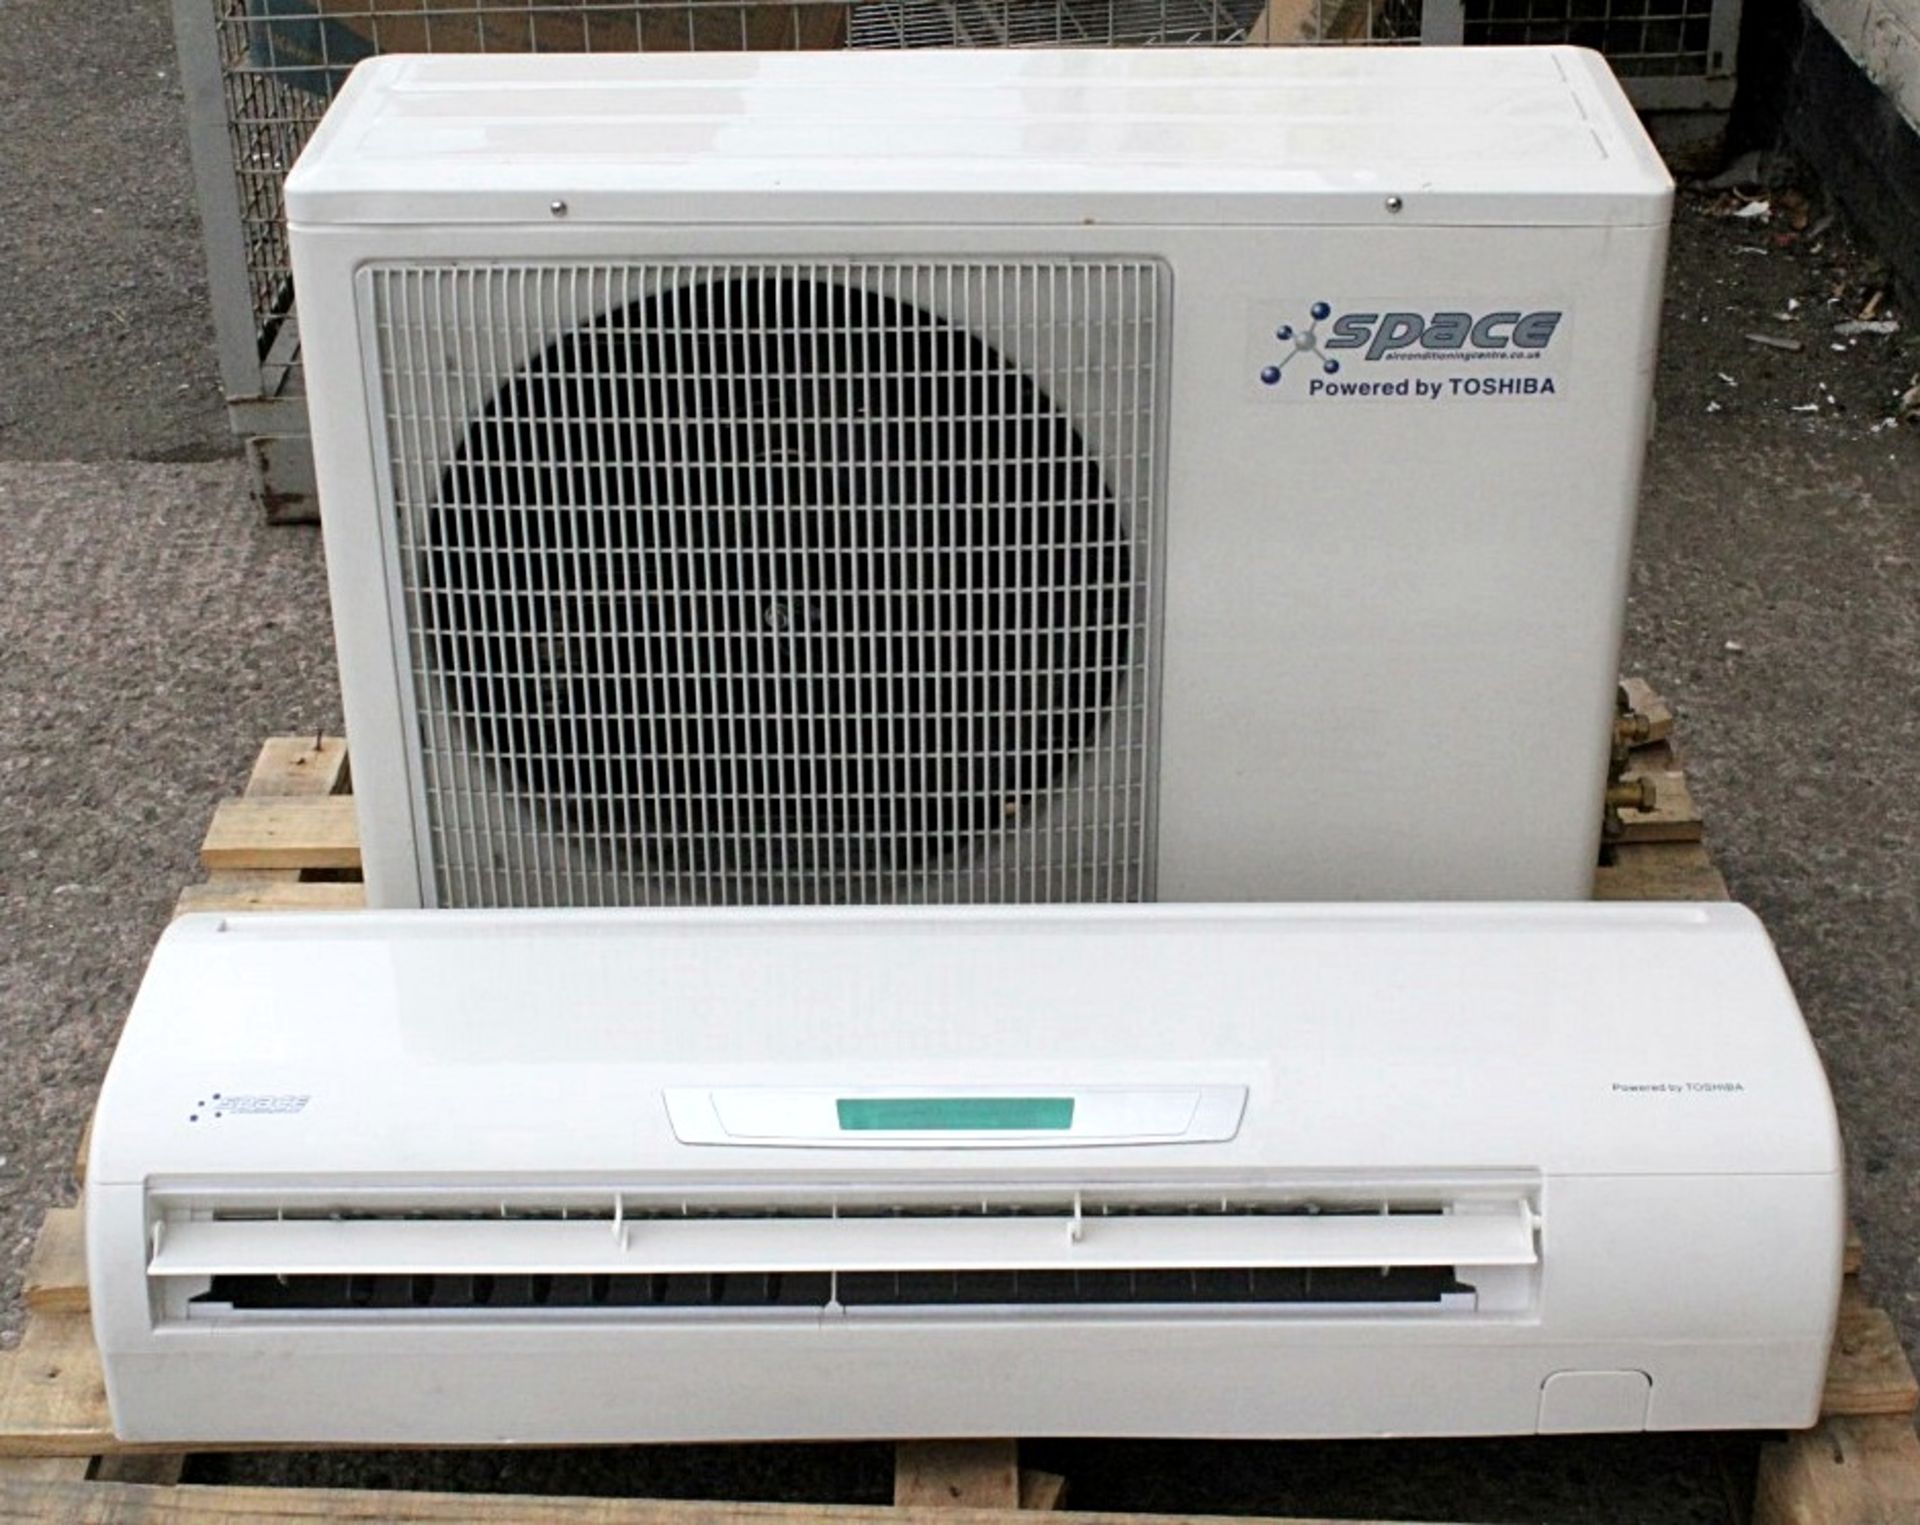 1 x TOSHIBA compressor KFR66GW - Easy Install Split Air Conditioning System With Copper Fittings -